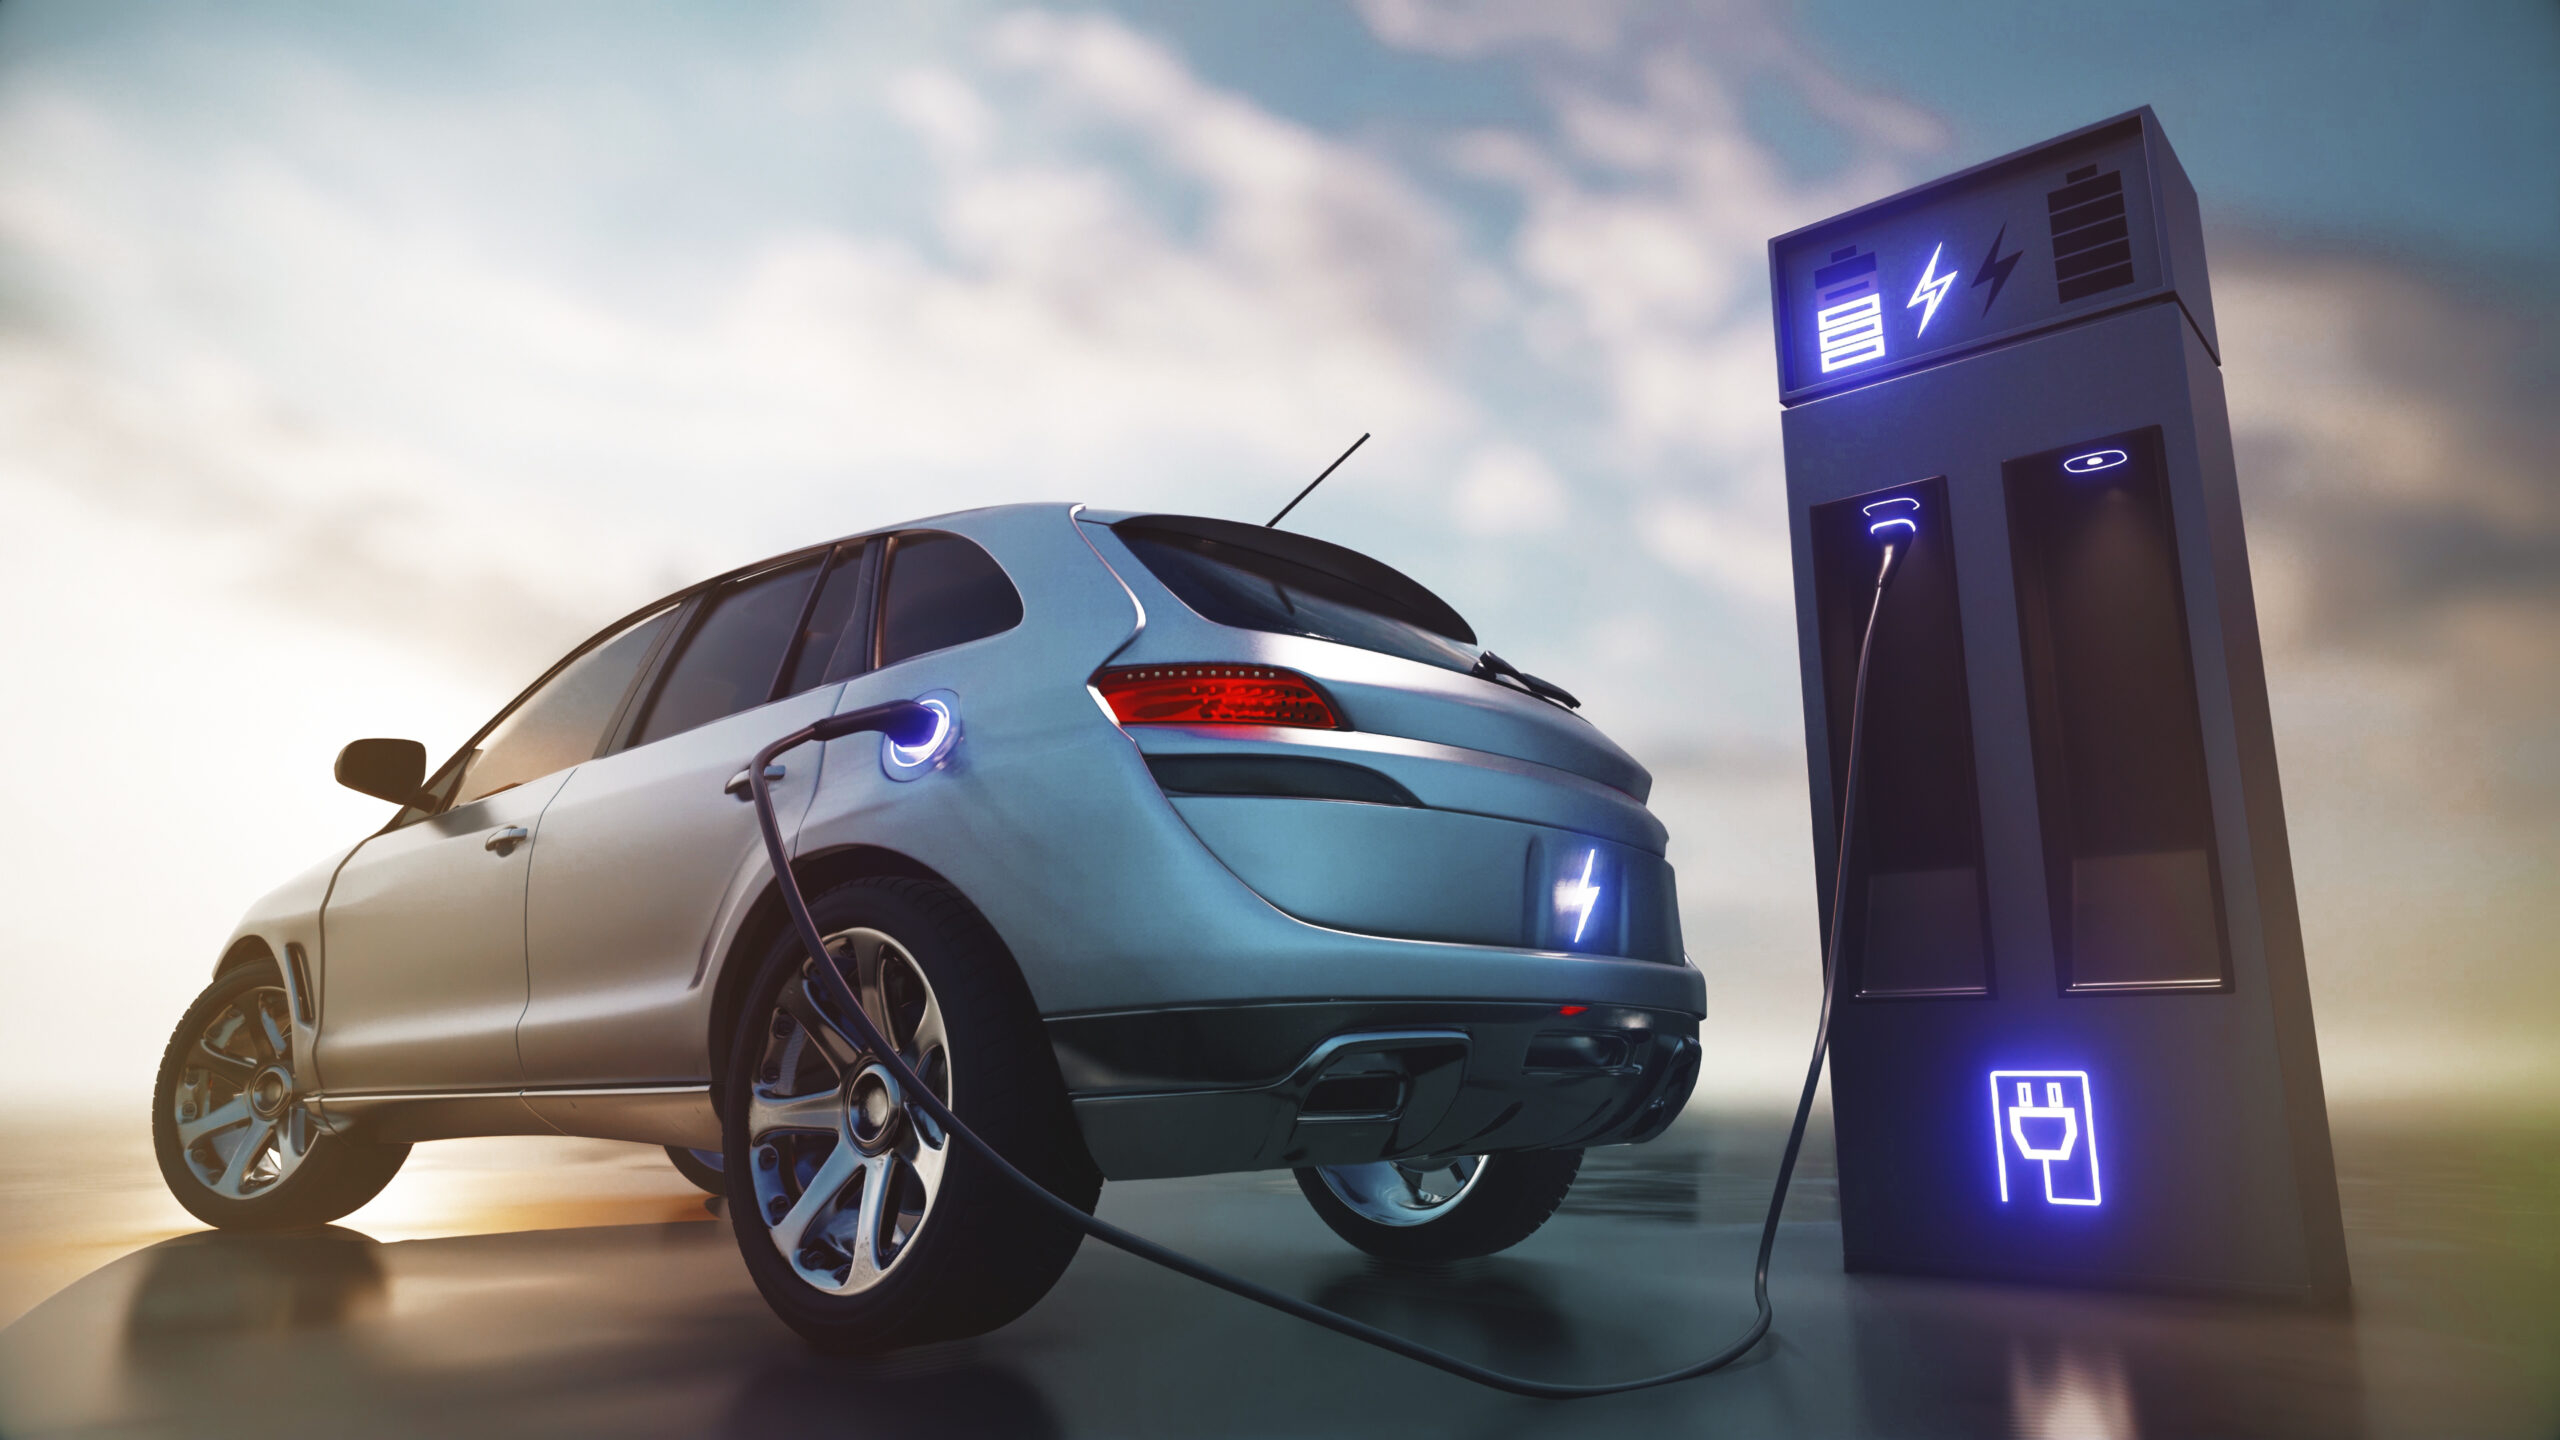 All-electric vehicles: A new age of mobility